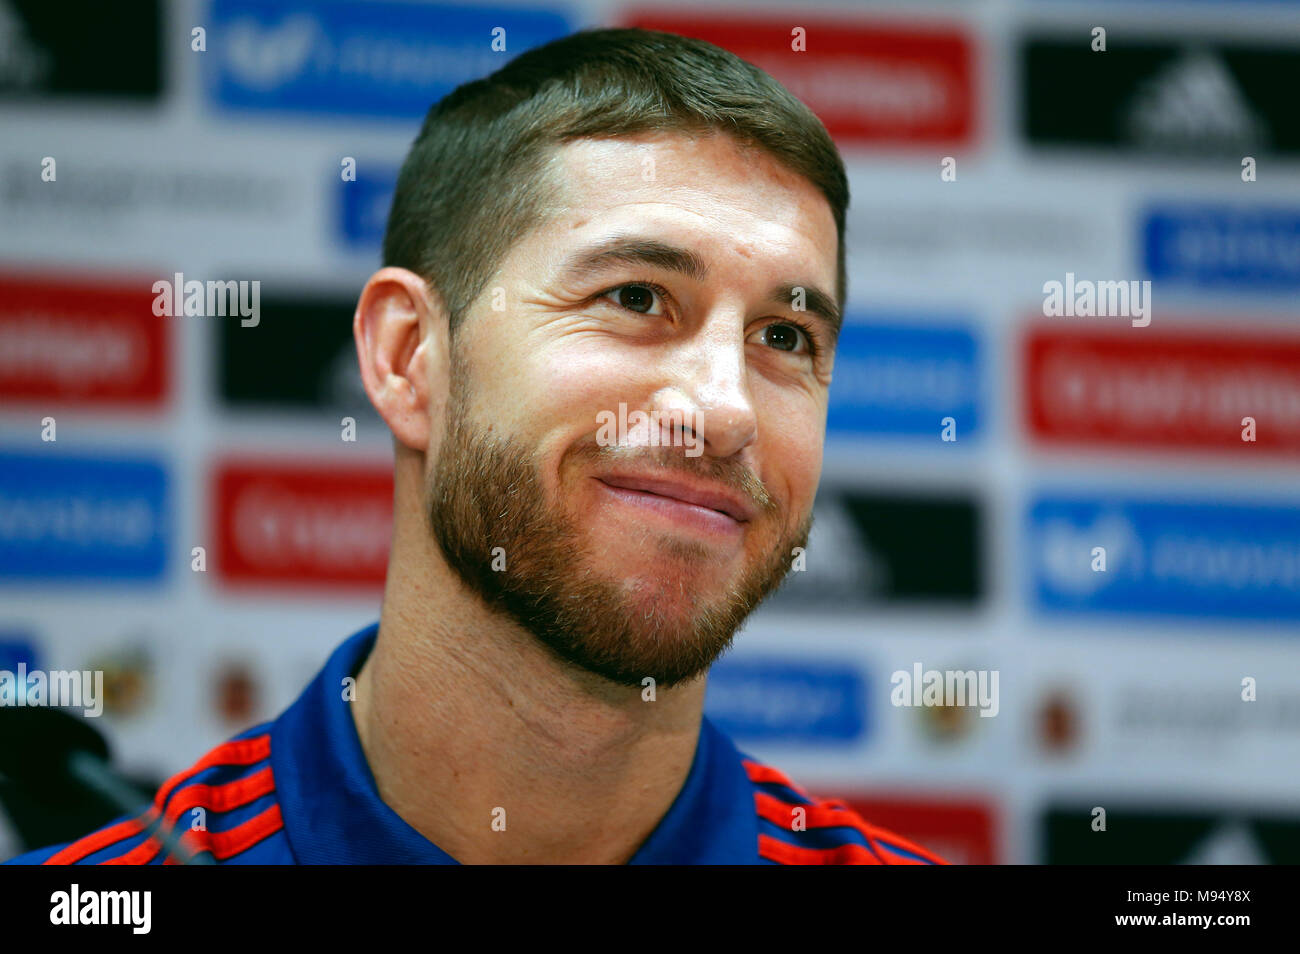 22 March 2018, Germany, Duesseldorf, Spain vs. Germany, Soccer press conference Spanish national team: Spanish player Sergio Ramos listens to the questions of the press. Spain is going to play on Friday 23 March 2018 against Germany in a friendly match. Photo: Ina Fassbender/dpa Stock Photo